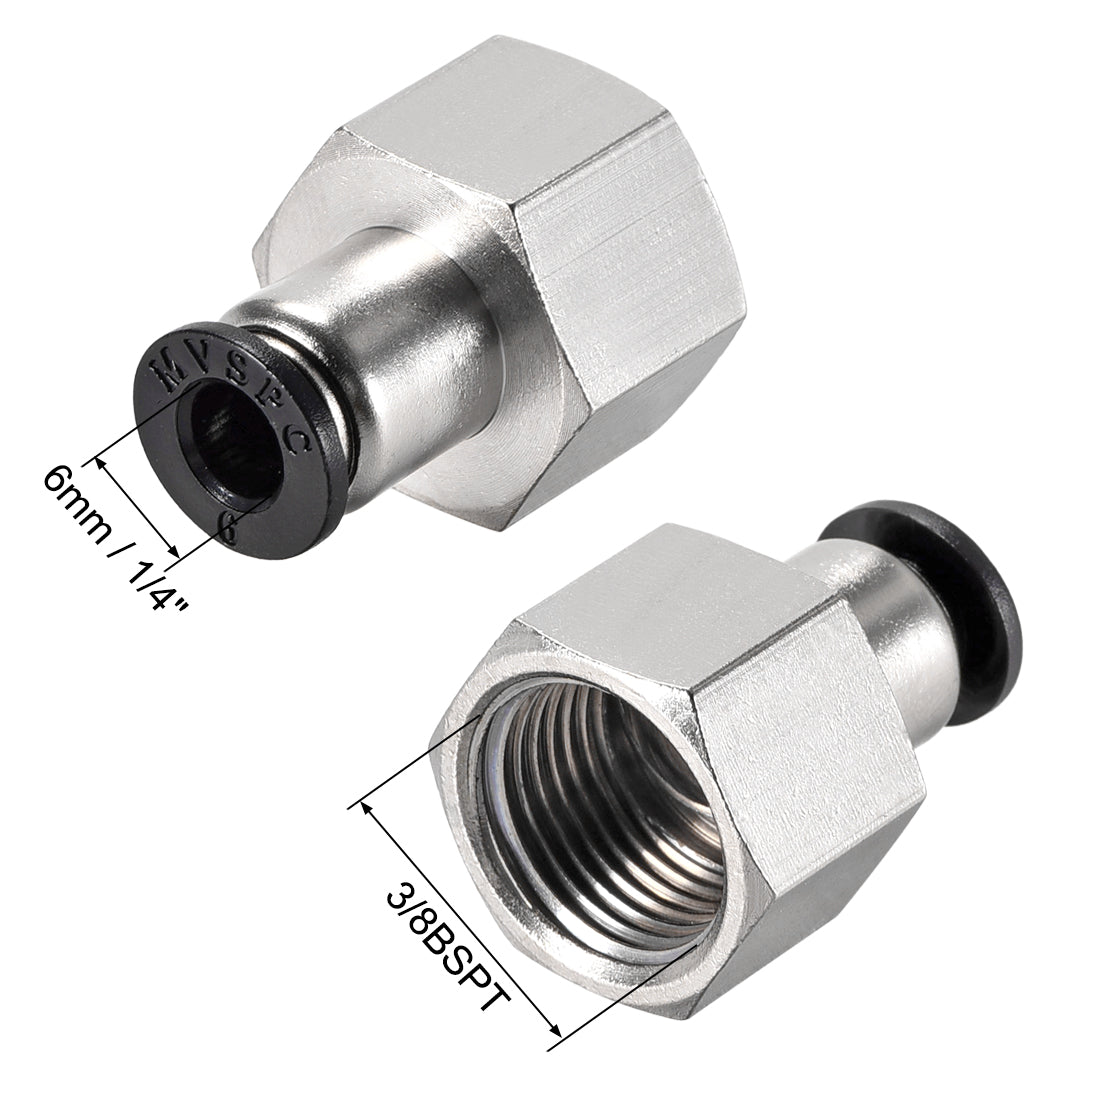 uxcell Uxcell Push to Connect Tube Fitting Adapter 6mm Tube OD x 3/8BSPT Female Straight Pneumatic Connecter Pipe Fitting